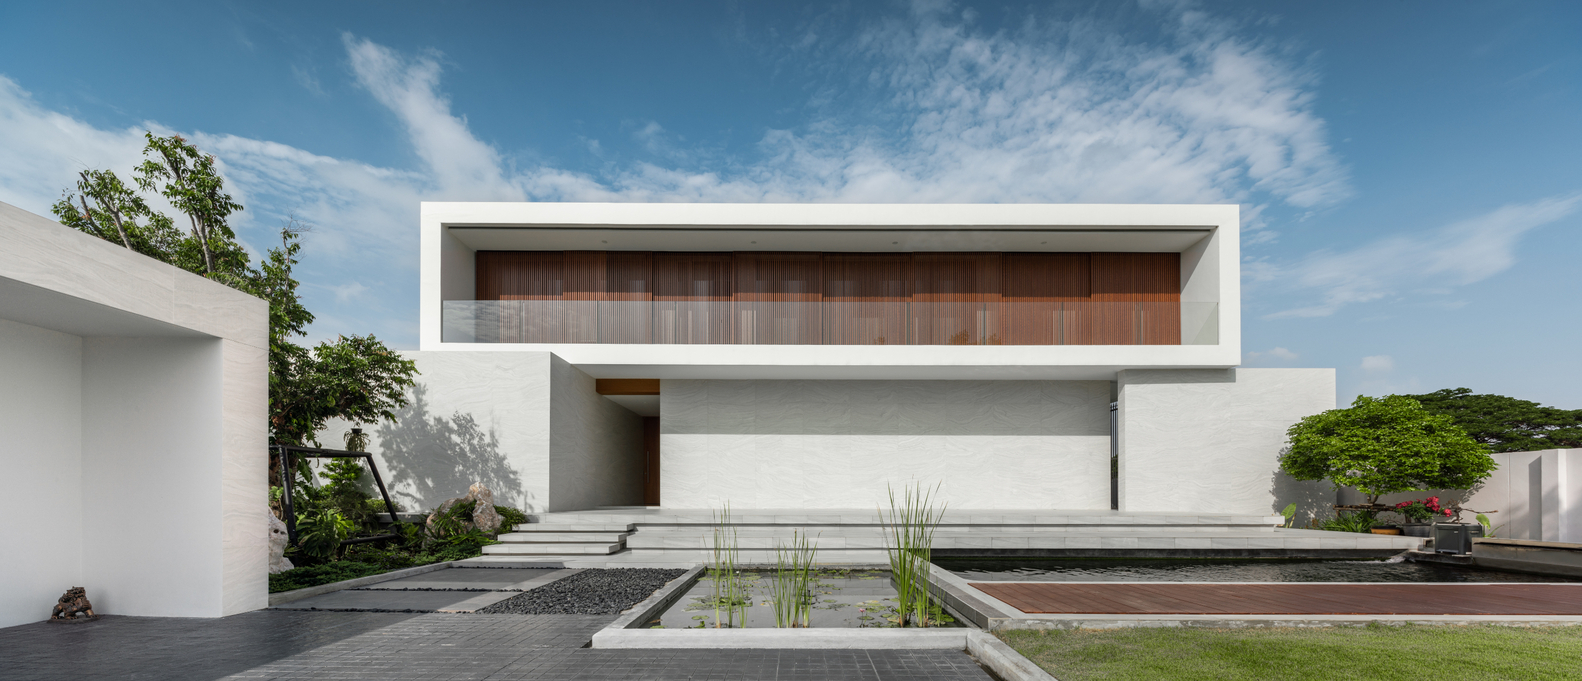 Front view of Sunset House. Photos by DOF Sky|Ground.